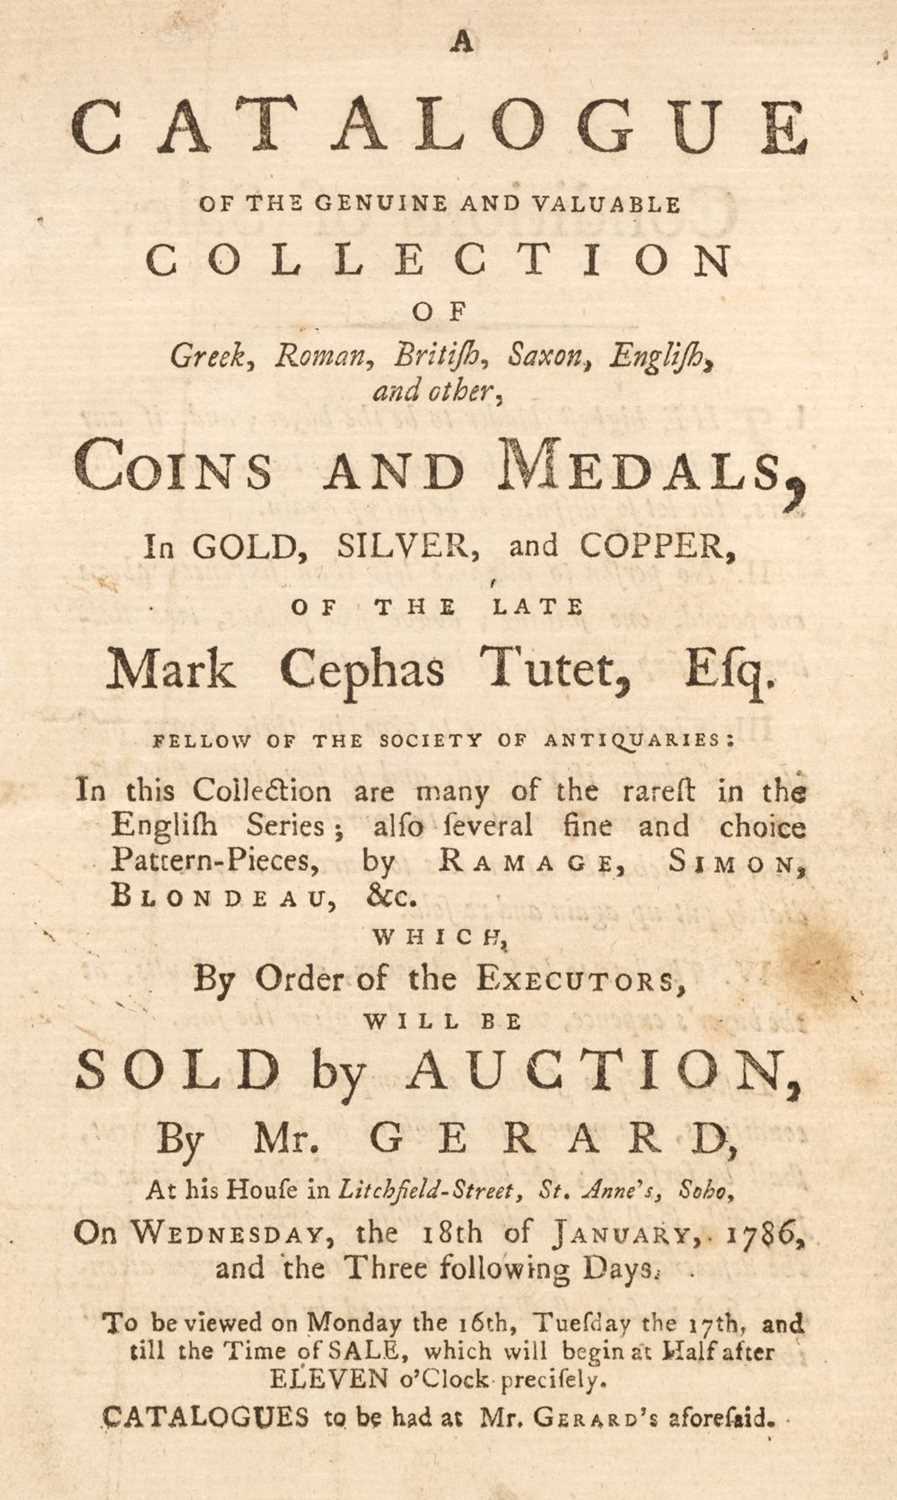 Lot 393 - Coin & Medal auction catalogues. A volume of 16 coin & medal auction catalogues, 1786-91